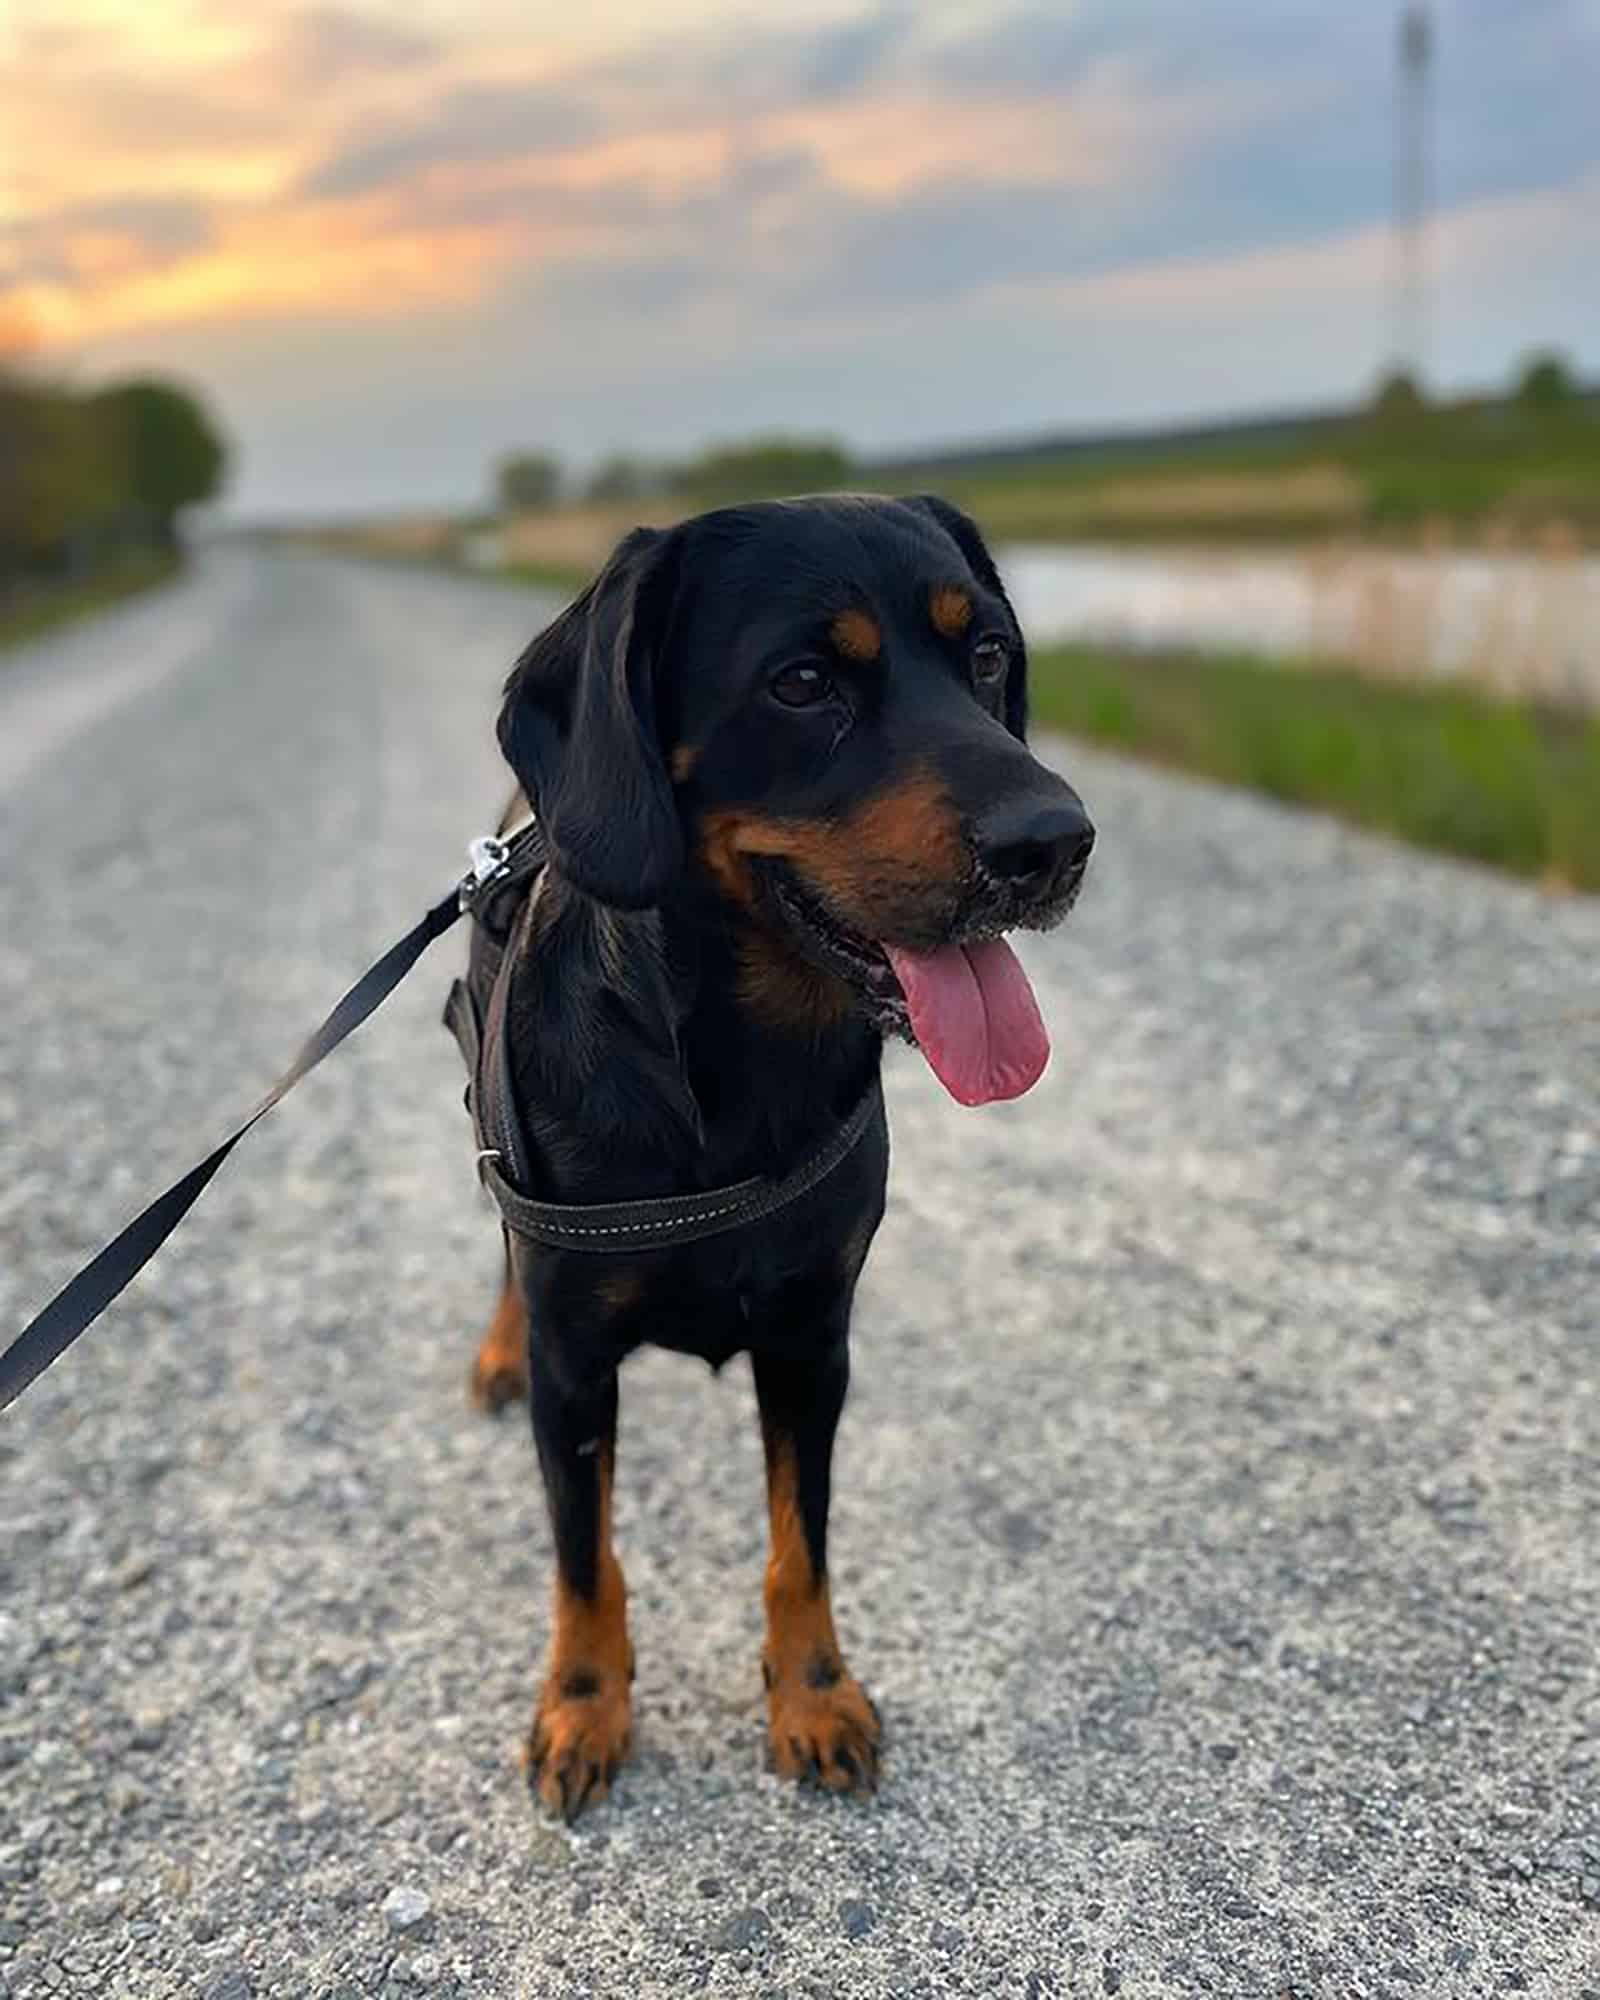 cockweiler standing on the road